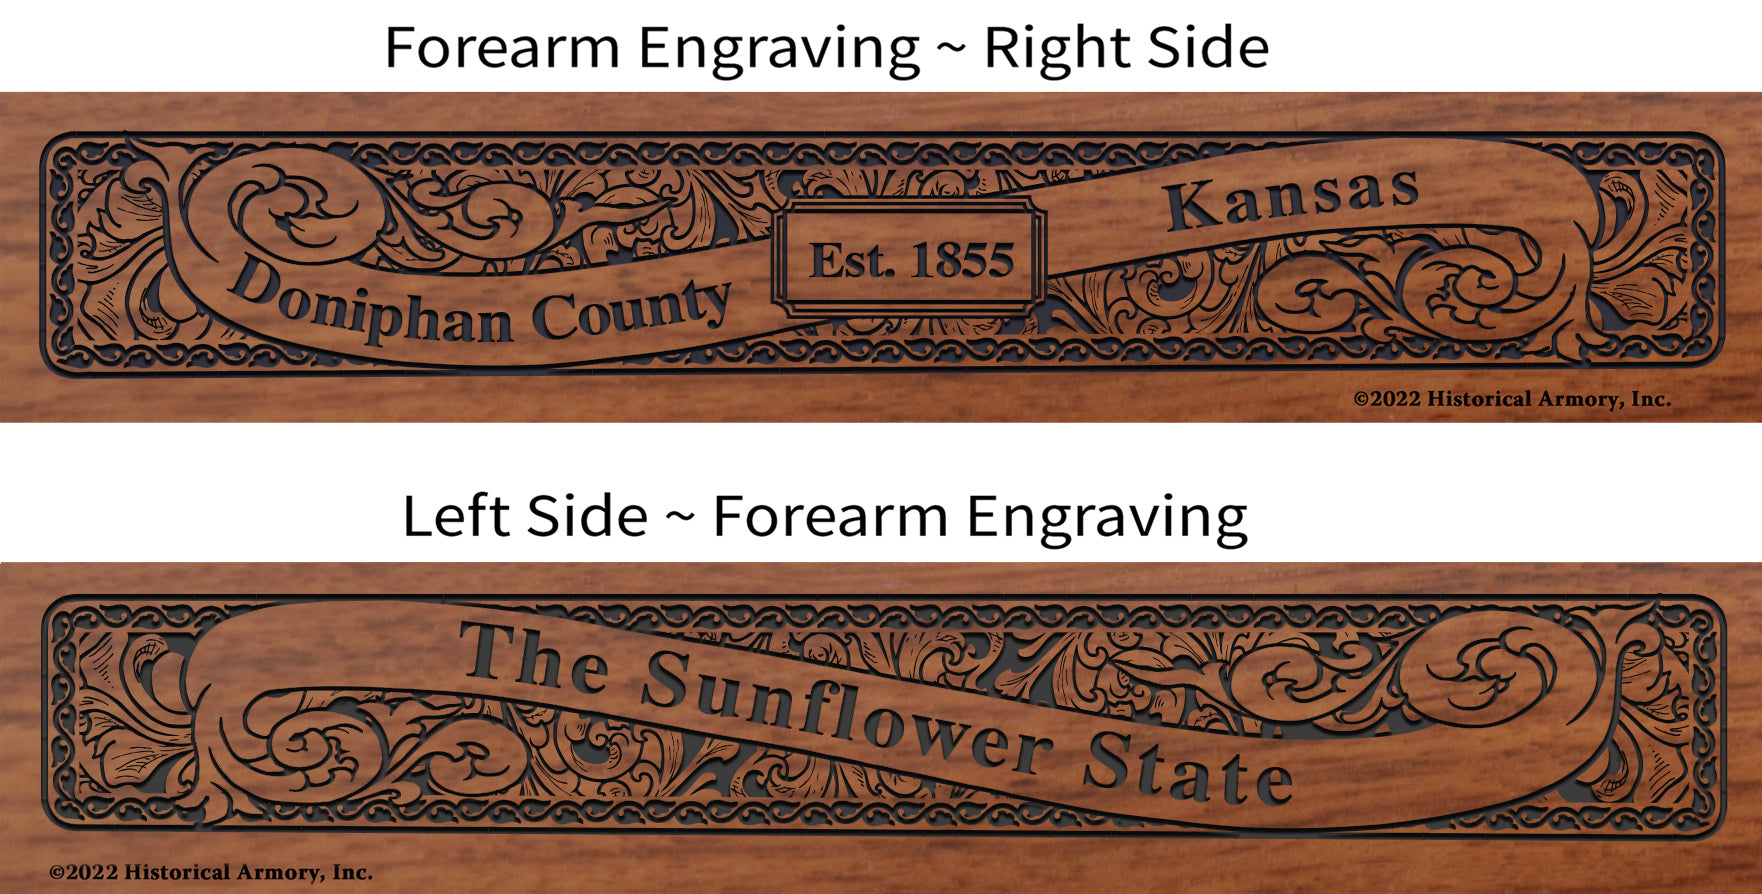 Doniphan County Kansas Engraved Rifle Forearm